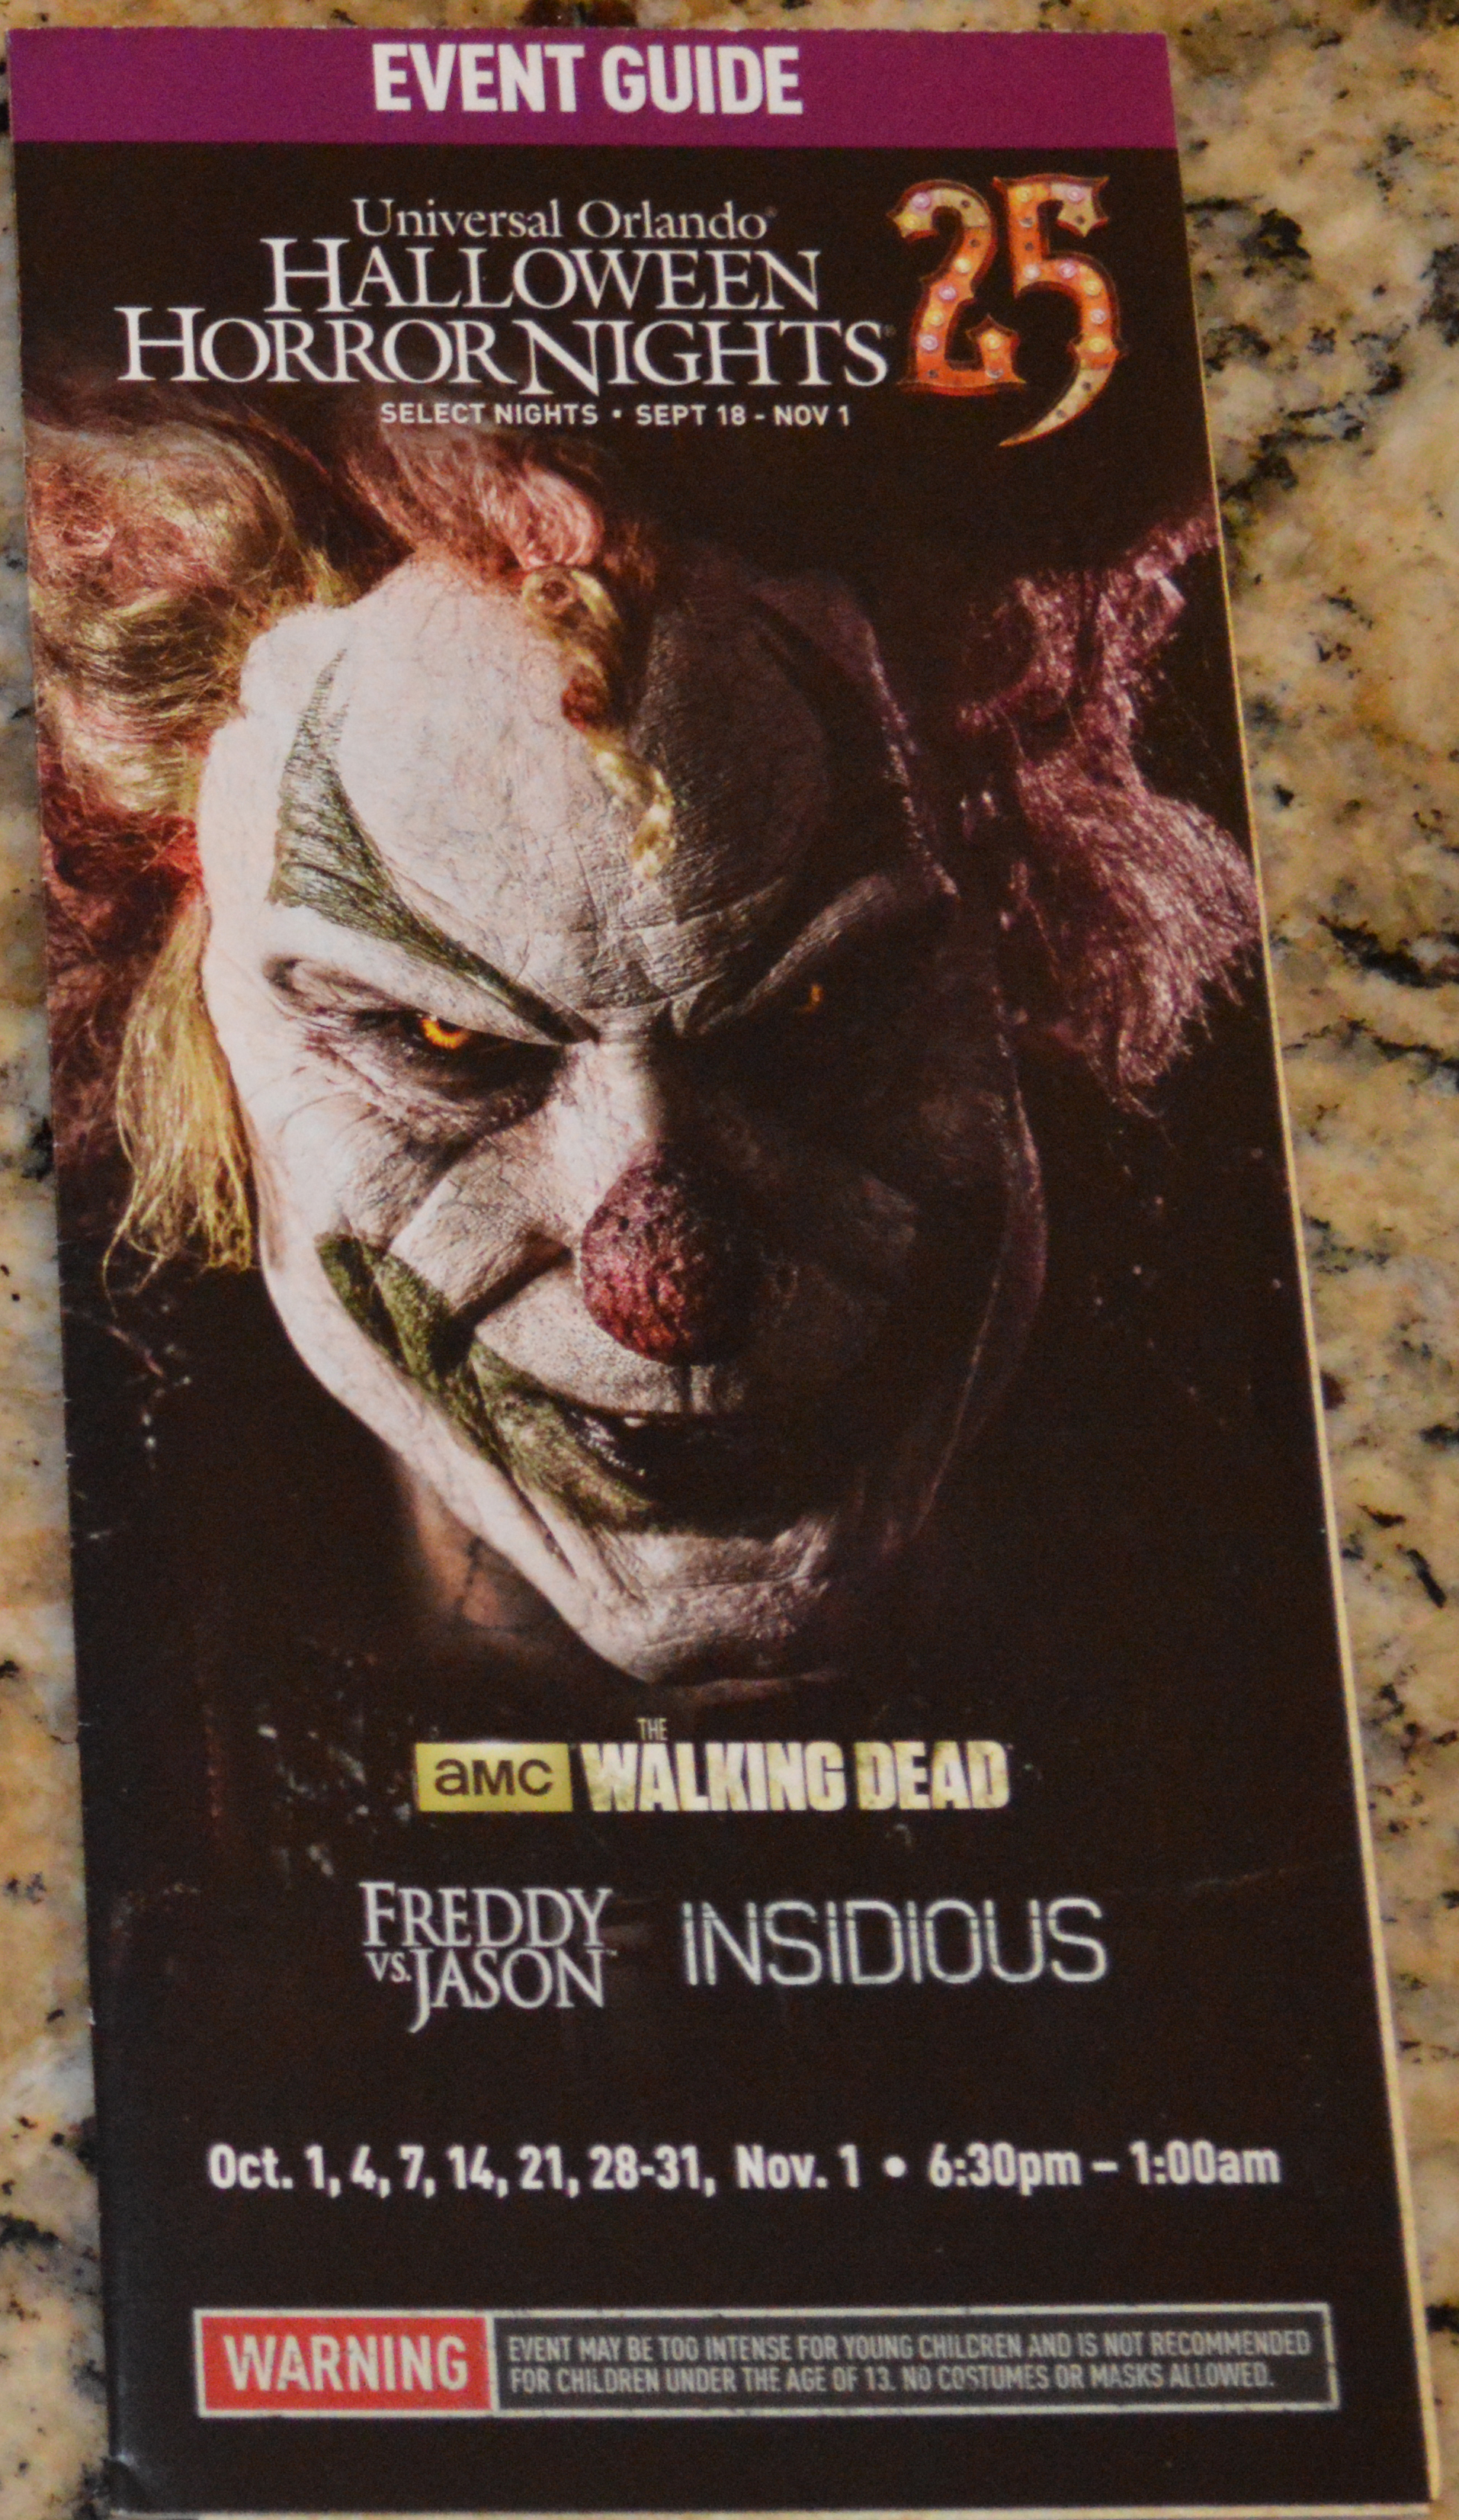 Details about   ANNUAL PASS HOLDER PIN 2014 UNIVERSAL HALLOWEEN HORROR NIGHT 3 EVENT GUIDES 